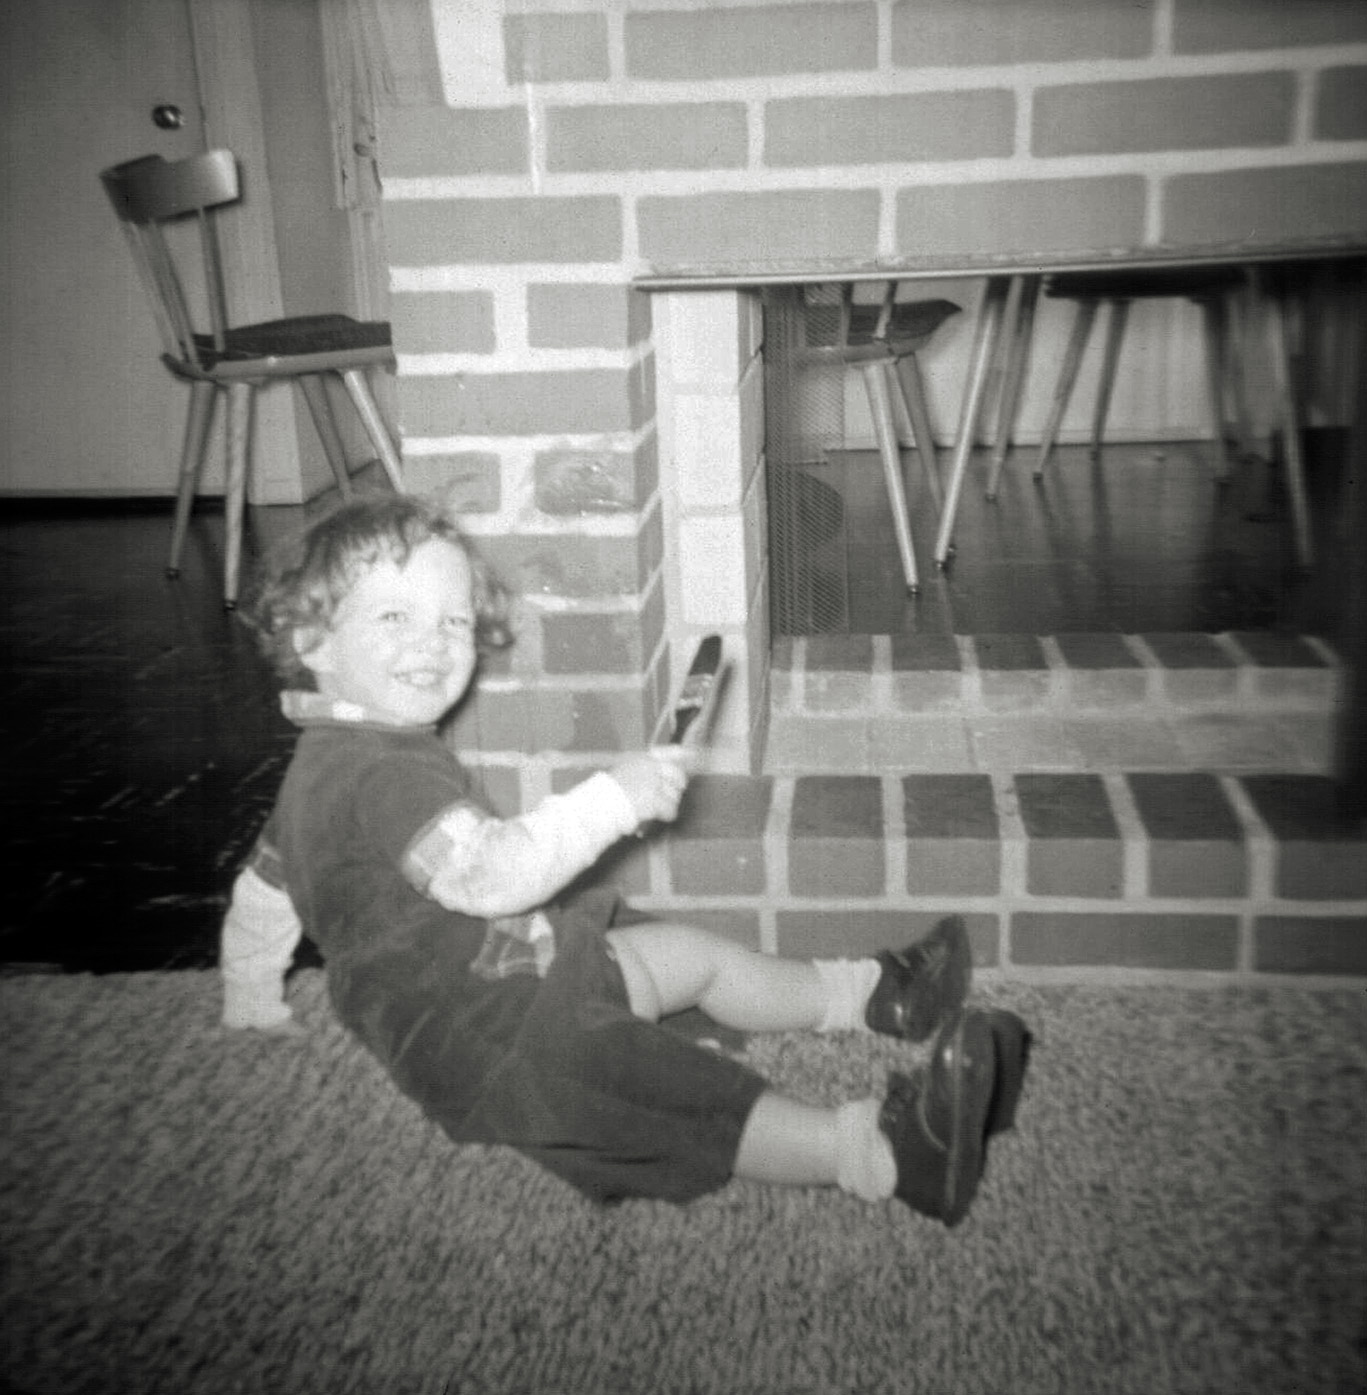 One of my absolute favorite childhood games was painting the fireplace bricks with water. If you don’t believe it is a good way to entertain a pre-school child, give that child a paint brush, (such as the one in my hand) and a cup of water, and let them loose on any porous surface that changes color, such as a cement patio, driveway, stones, or bricks. You can barely see the areas I painted, to the right of my face, but you can certainly see my glee.

That unique-to-Levittown crawl-through fireplace which connects the living room (where I am sitting) to the kitchen is also in view. Beyond it are the mid-century modern Paul McCobb kitchen chairs and table my parents bought in 1953 to furnish their then-brand new house. Photo was taken with an Argus 75 box camera and sure-to-wash-out-all-faces flash bulb by one of my parents. Scan was made from a negative. View full size.